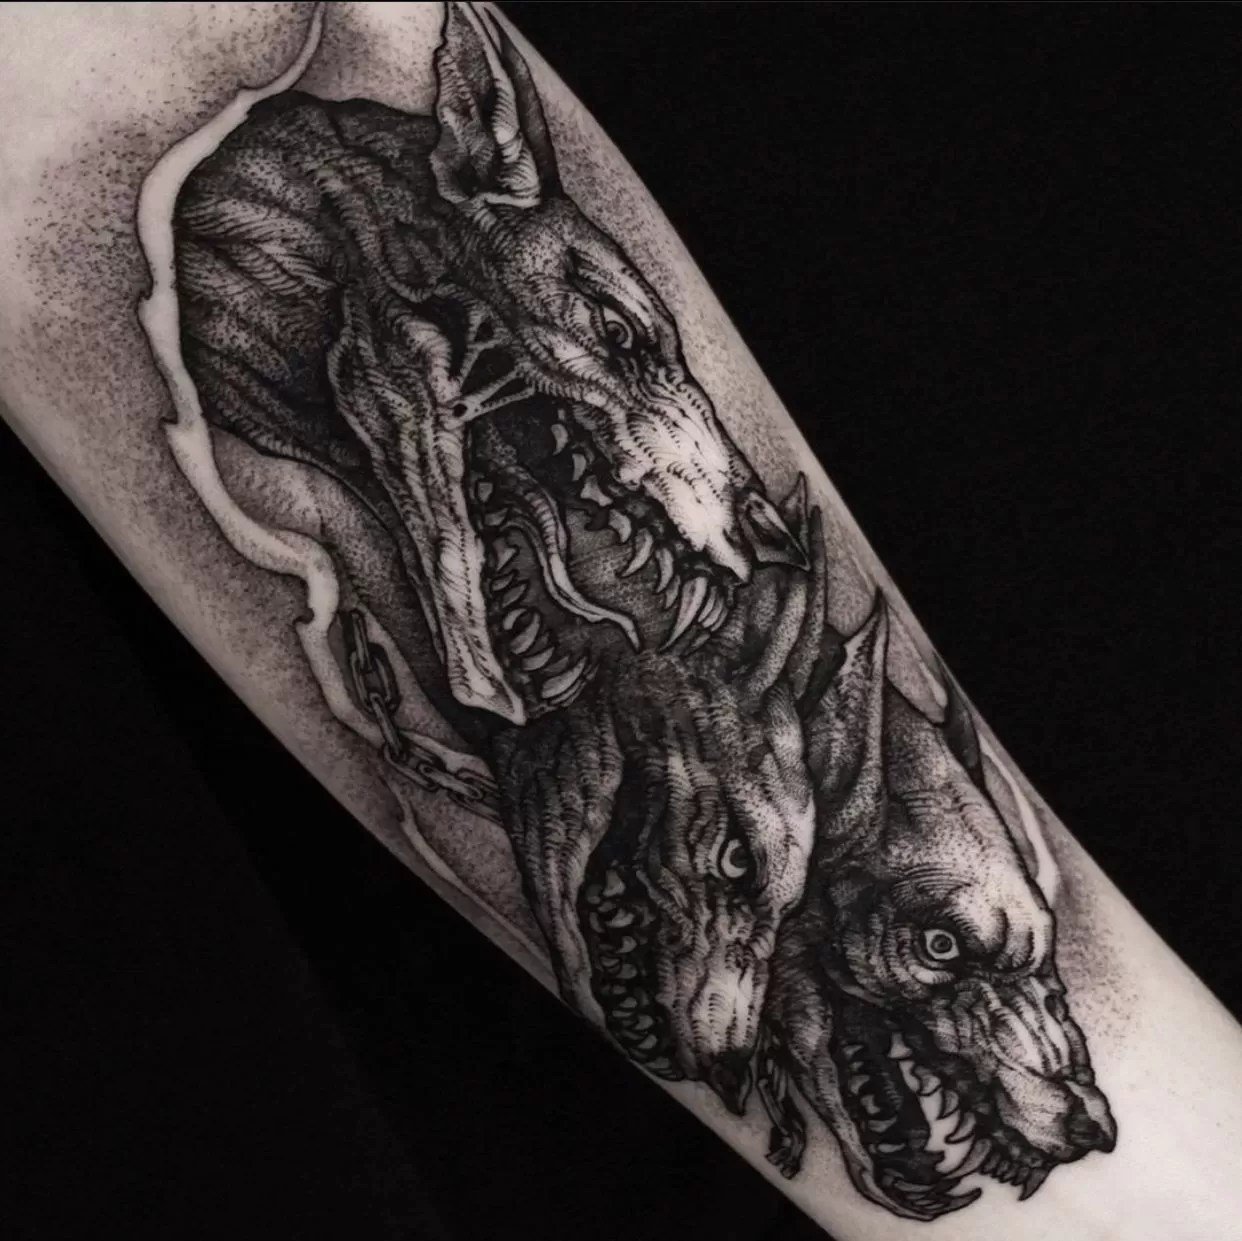 Understanding the Meaning and Symbolism Behind Cerberus Tattoos